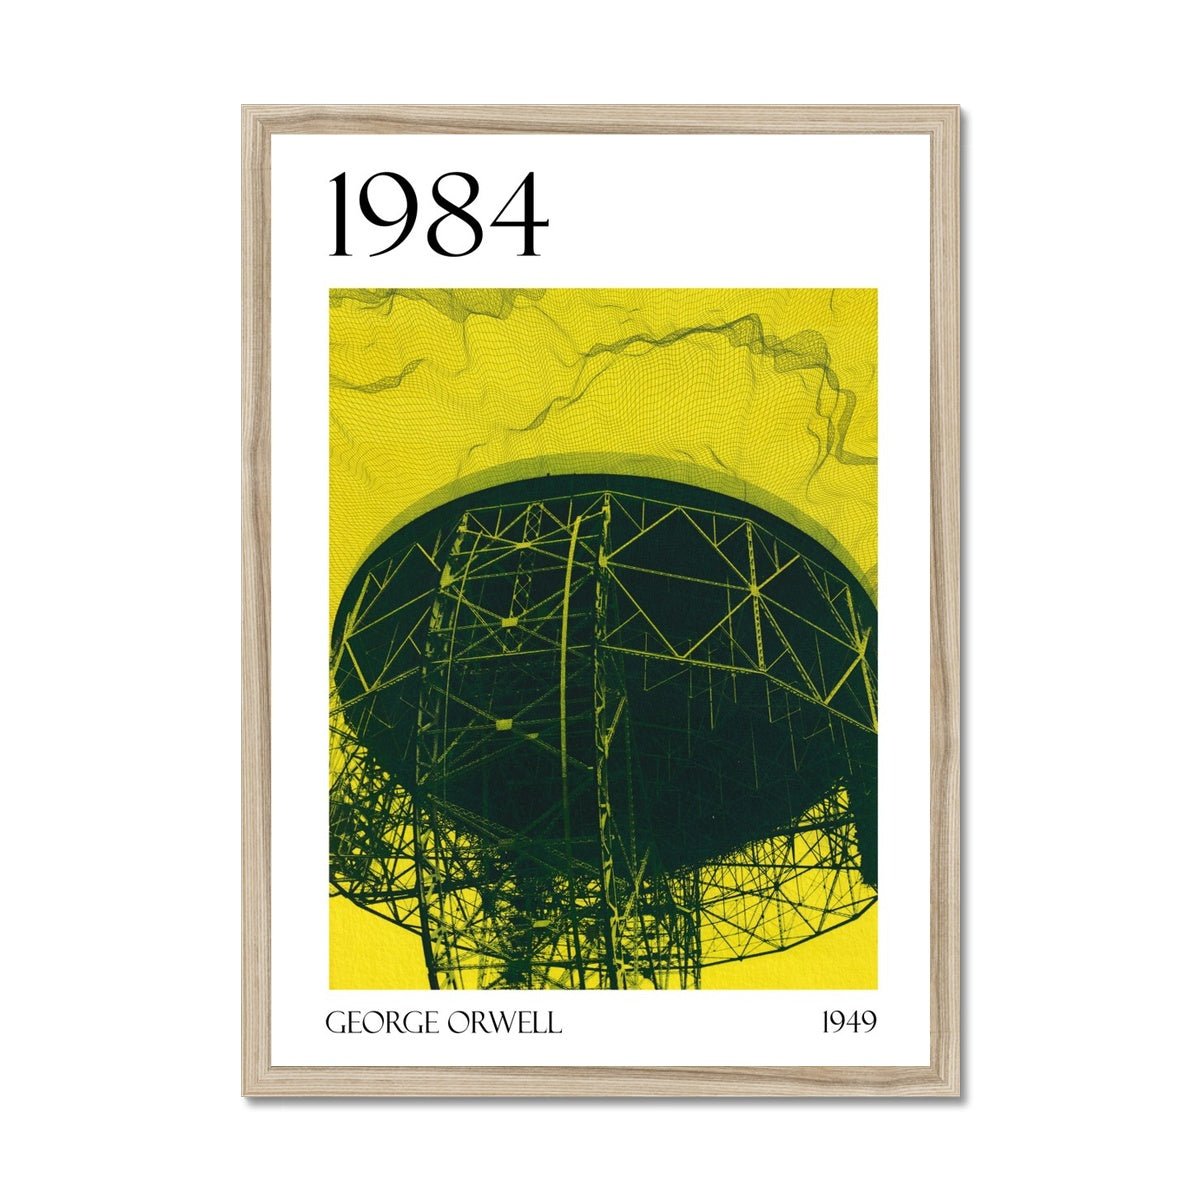 A natural wooden framed fine art print of George Orwell's 1984 "Big Brother is Listening" showing the Lovell Telescope on yellow background